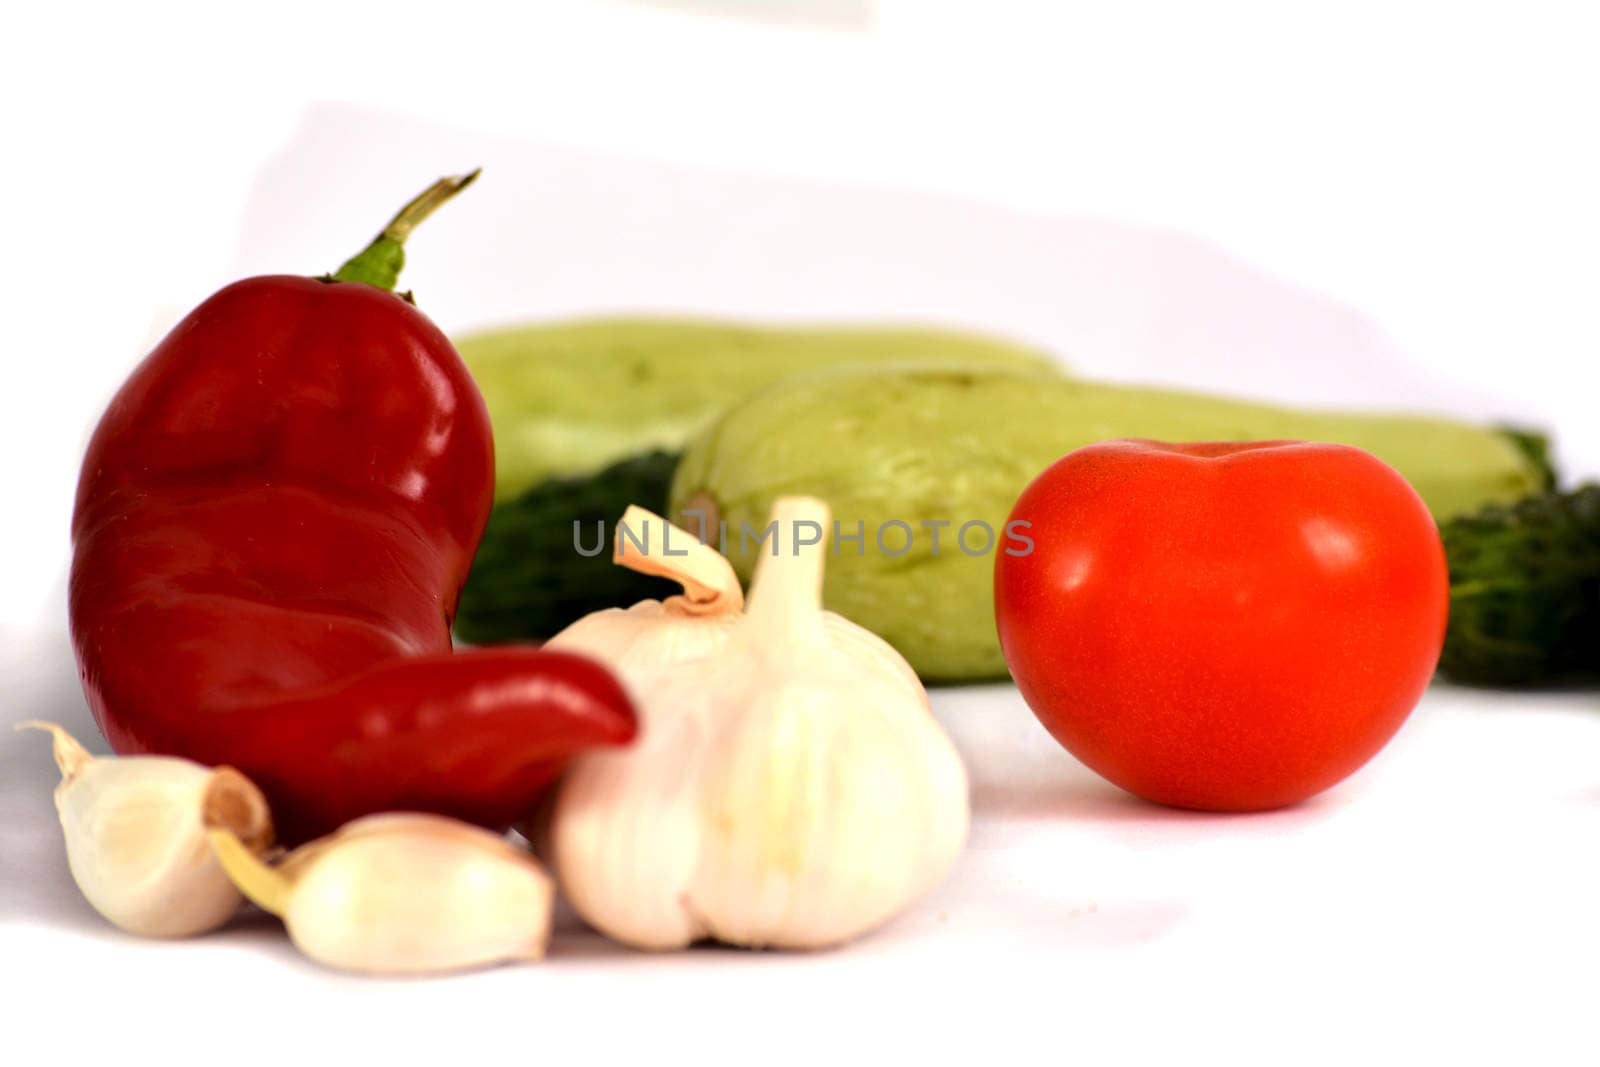 Healthy food, fresh green and red vegetables, vitamins.